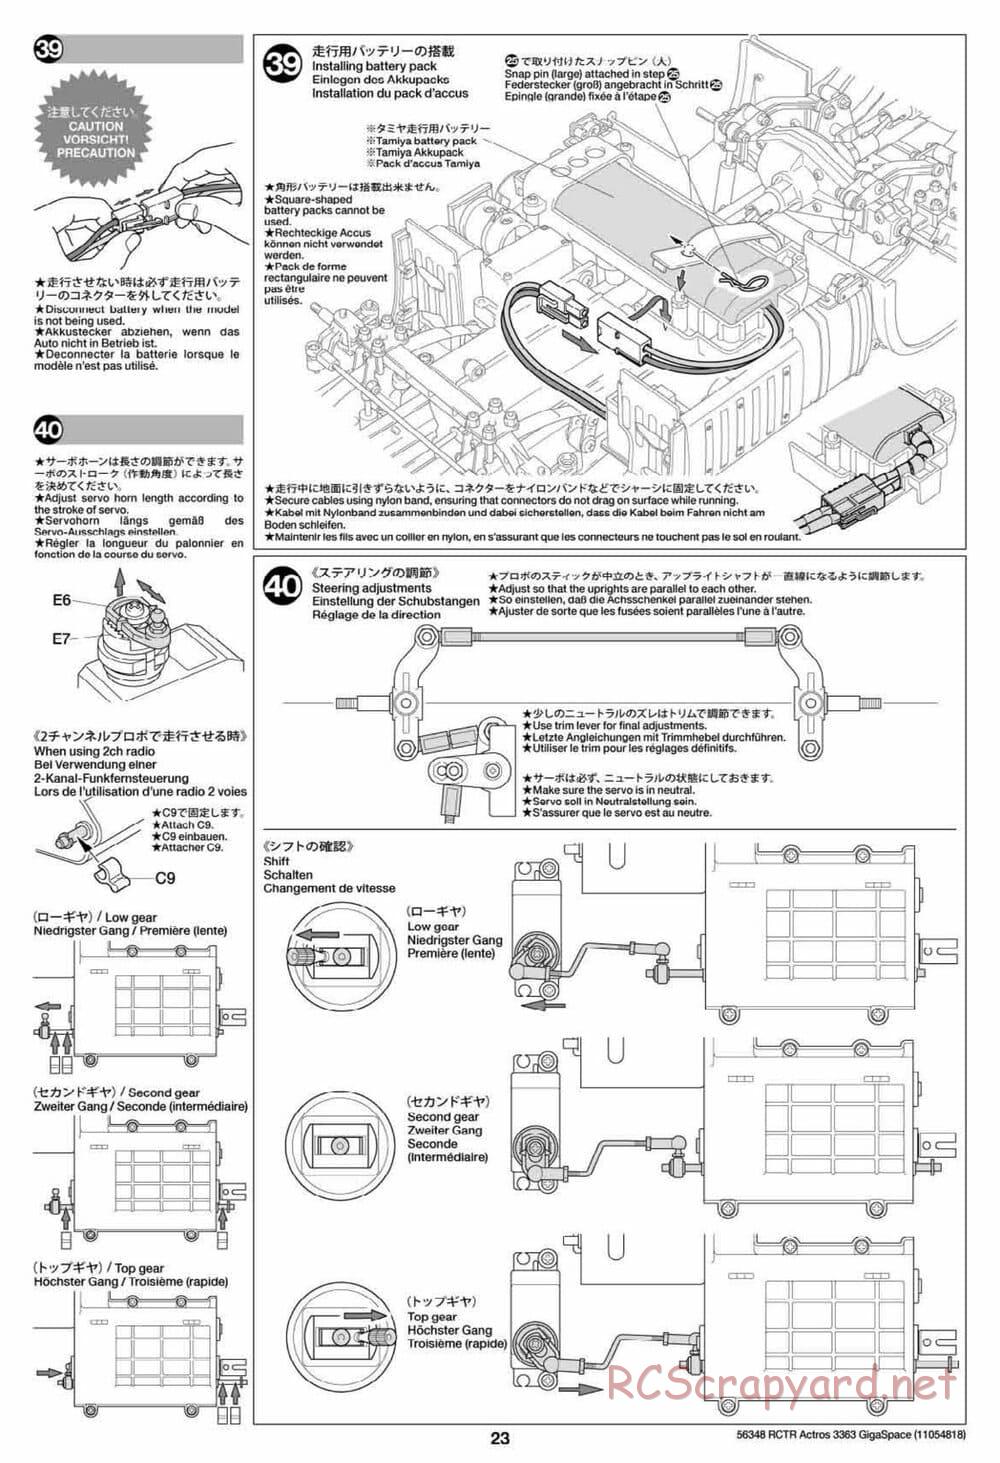 Tamiya - Mercedes-Benz Actros 3363 6x4 GigaSpace Tractor Truck Chassis - Manual - Page 23